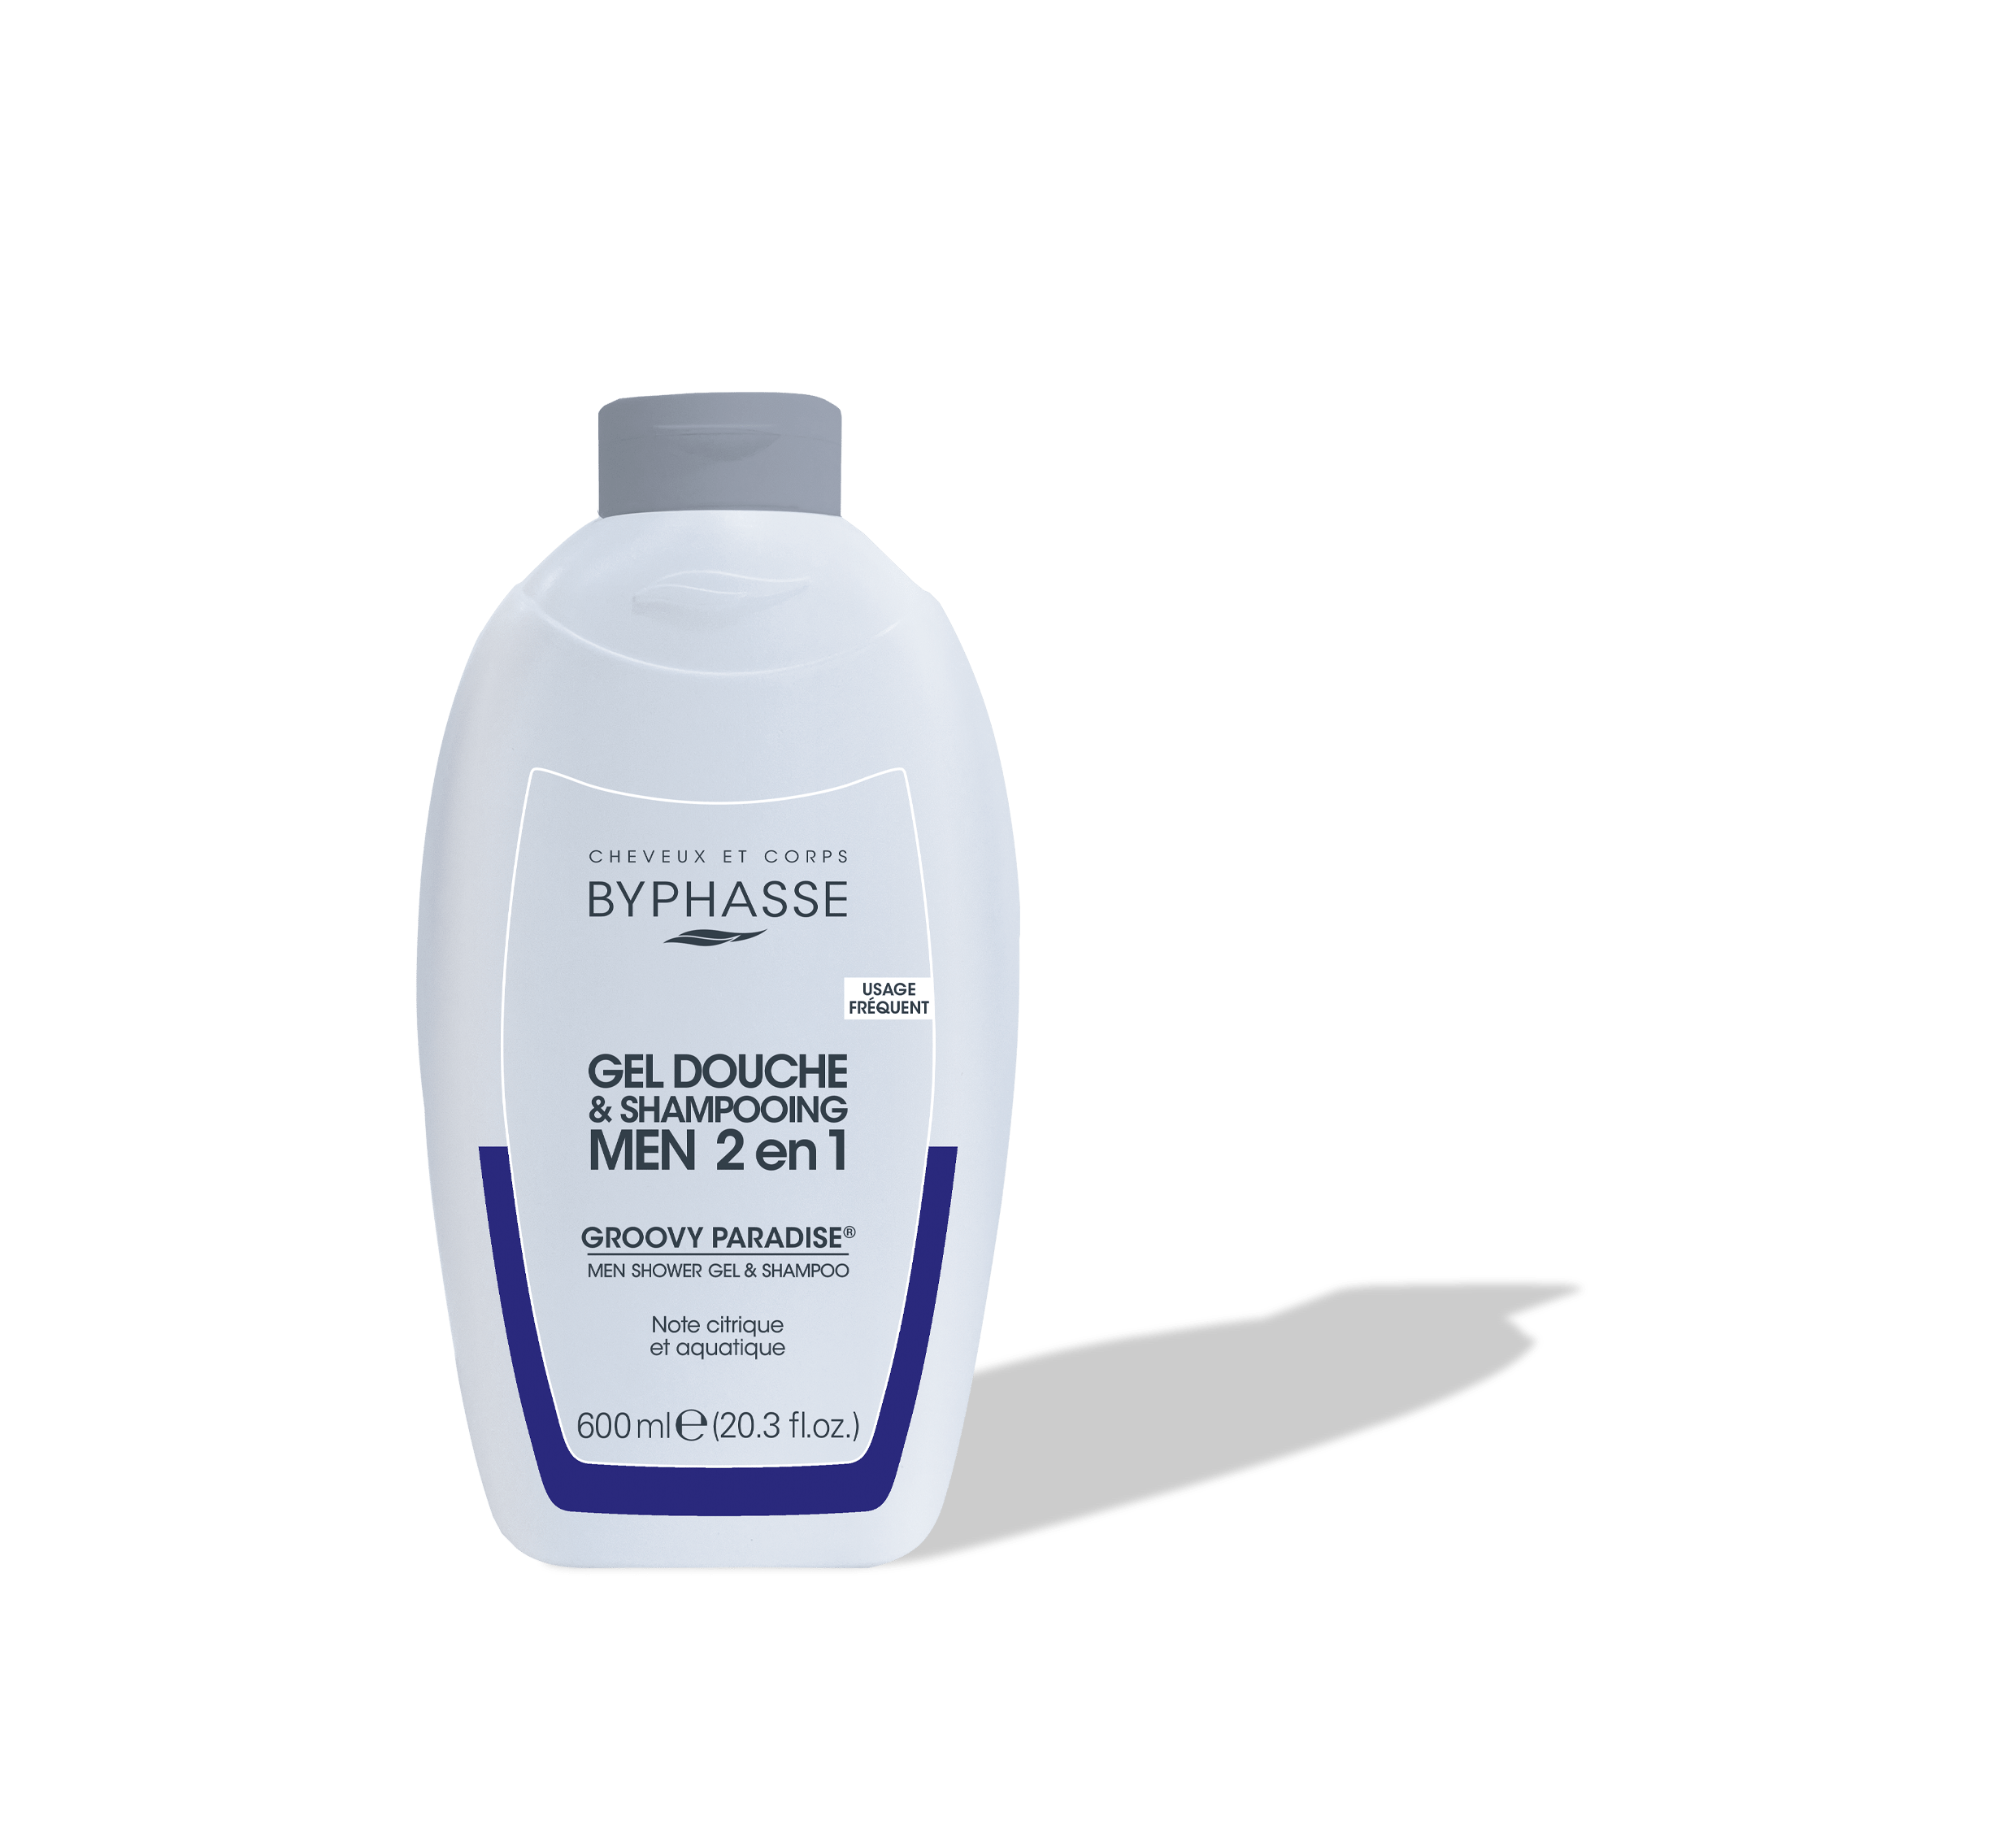 Byphasse - Gel douche & shampooing Urban Swing